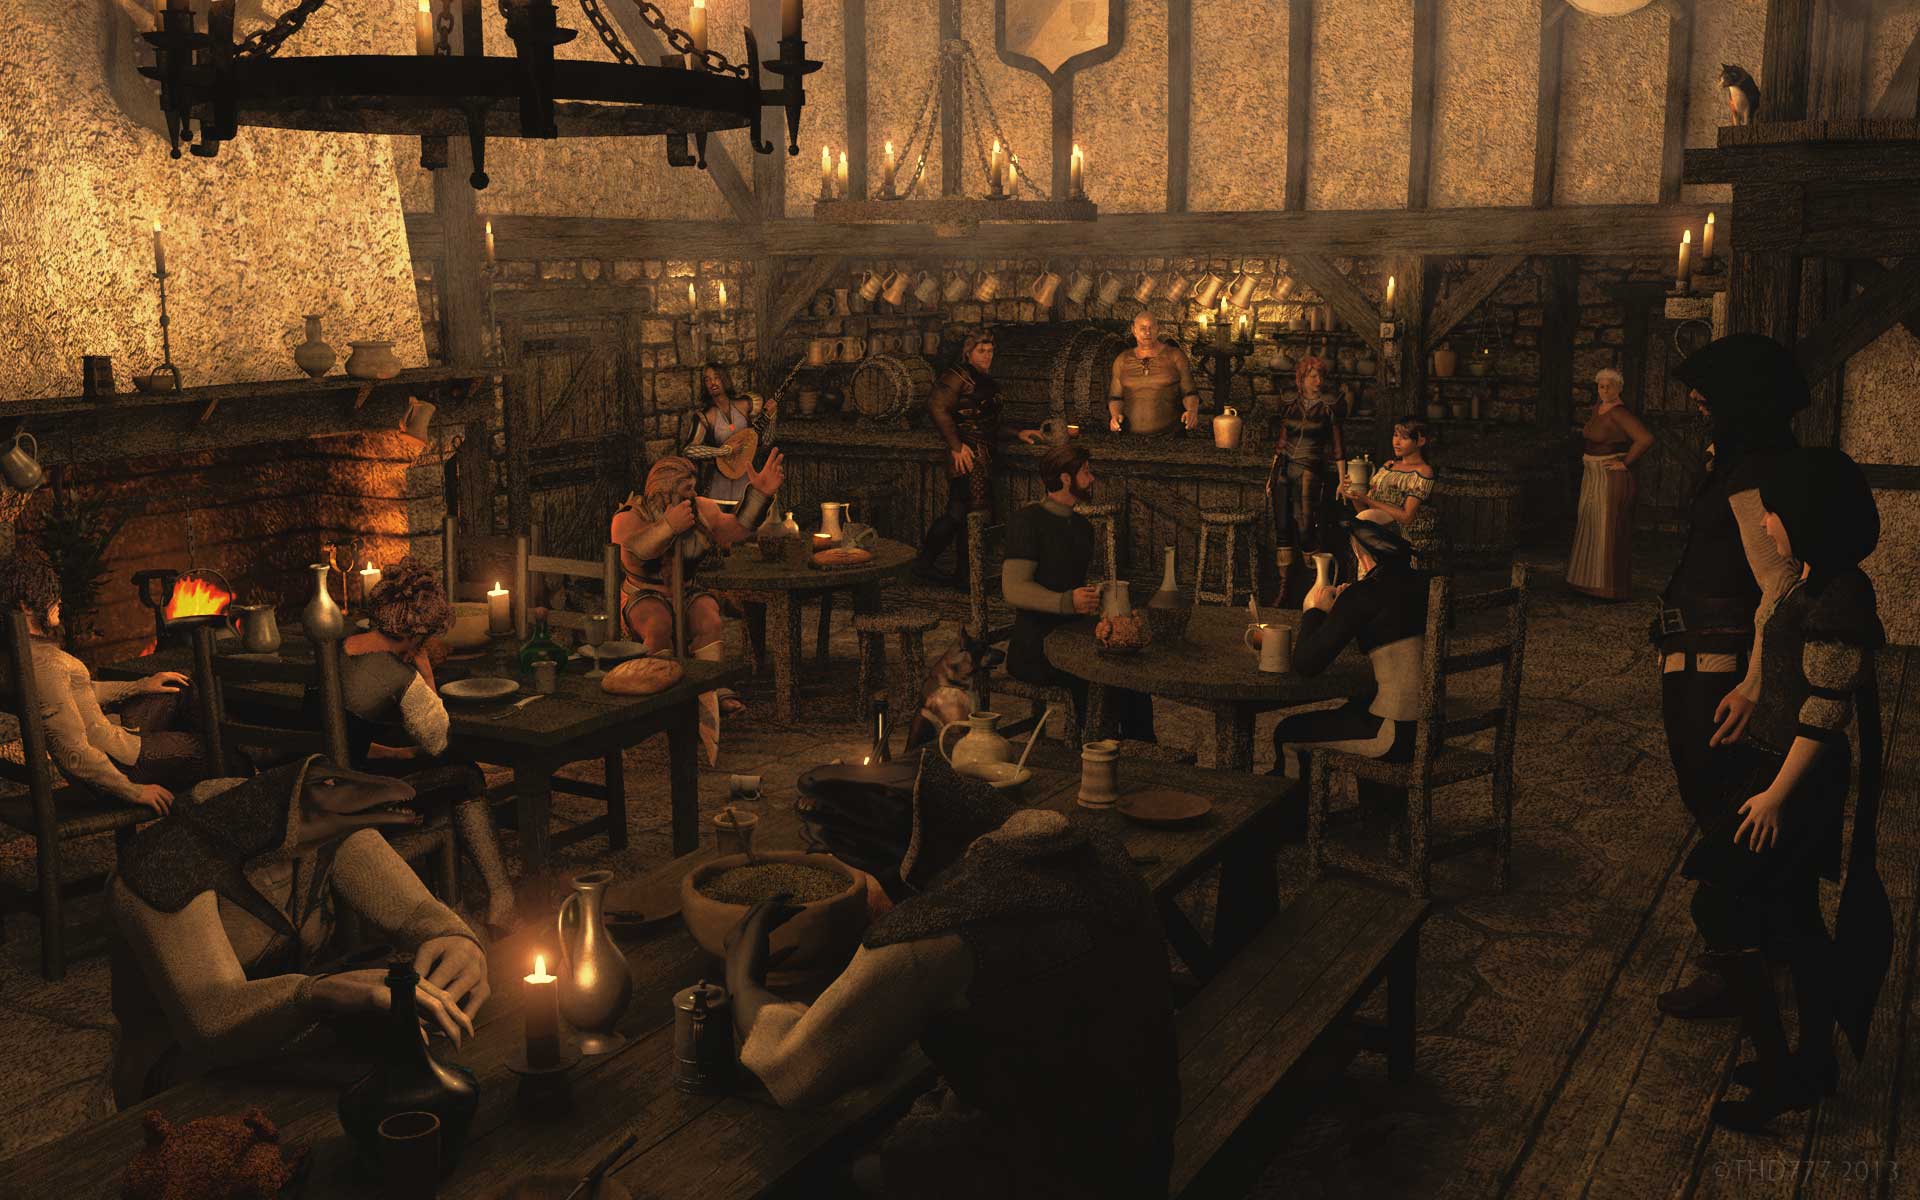 The Tavern by thd777 on DeviantArt